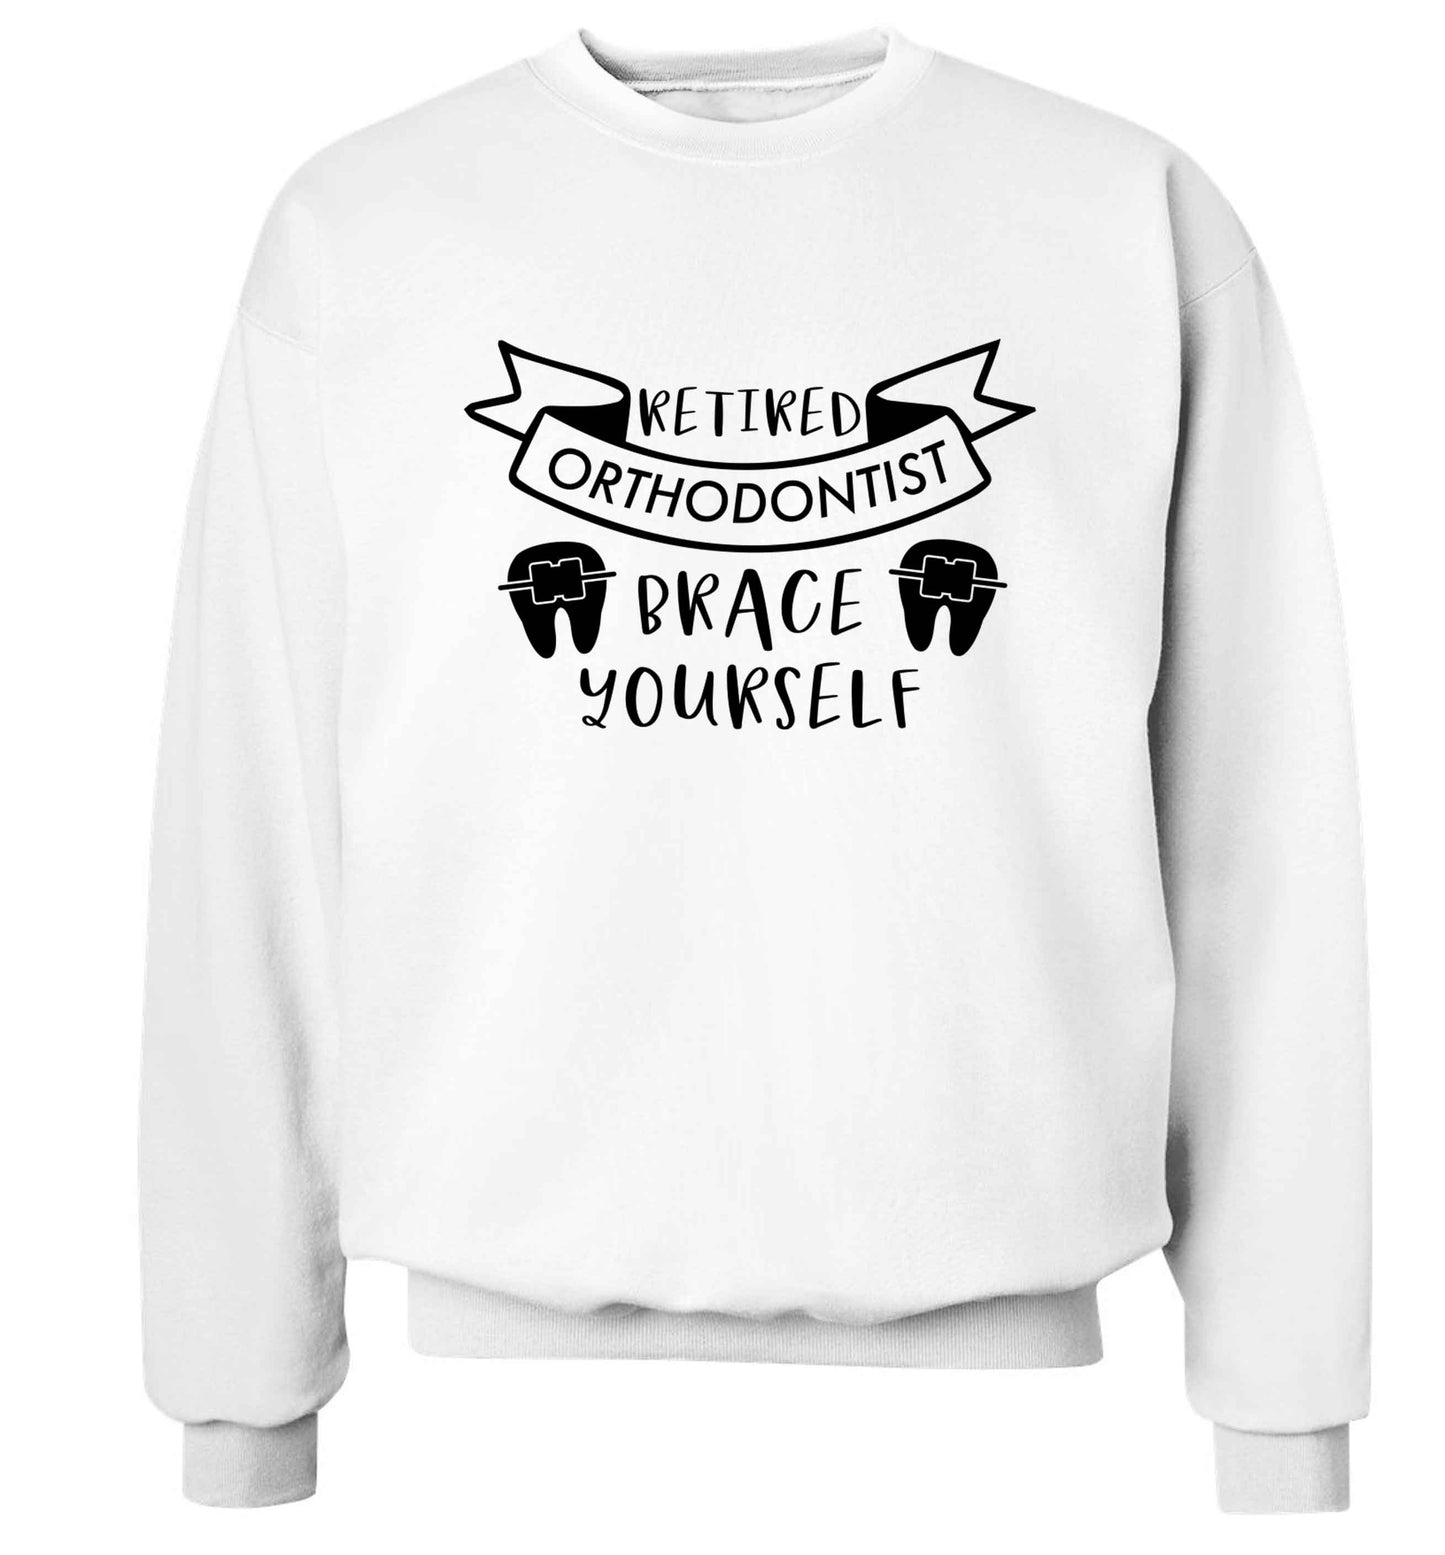 Retired orthodontist brace yourself Adult's unisex white Sweater 2XL